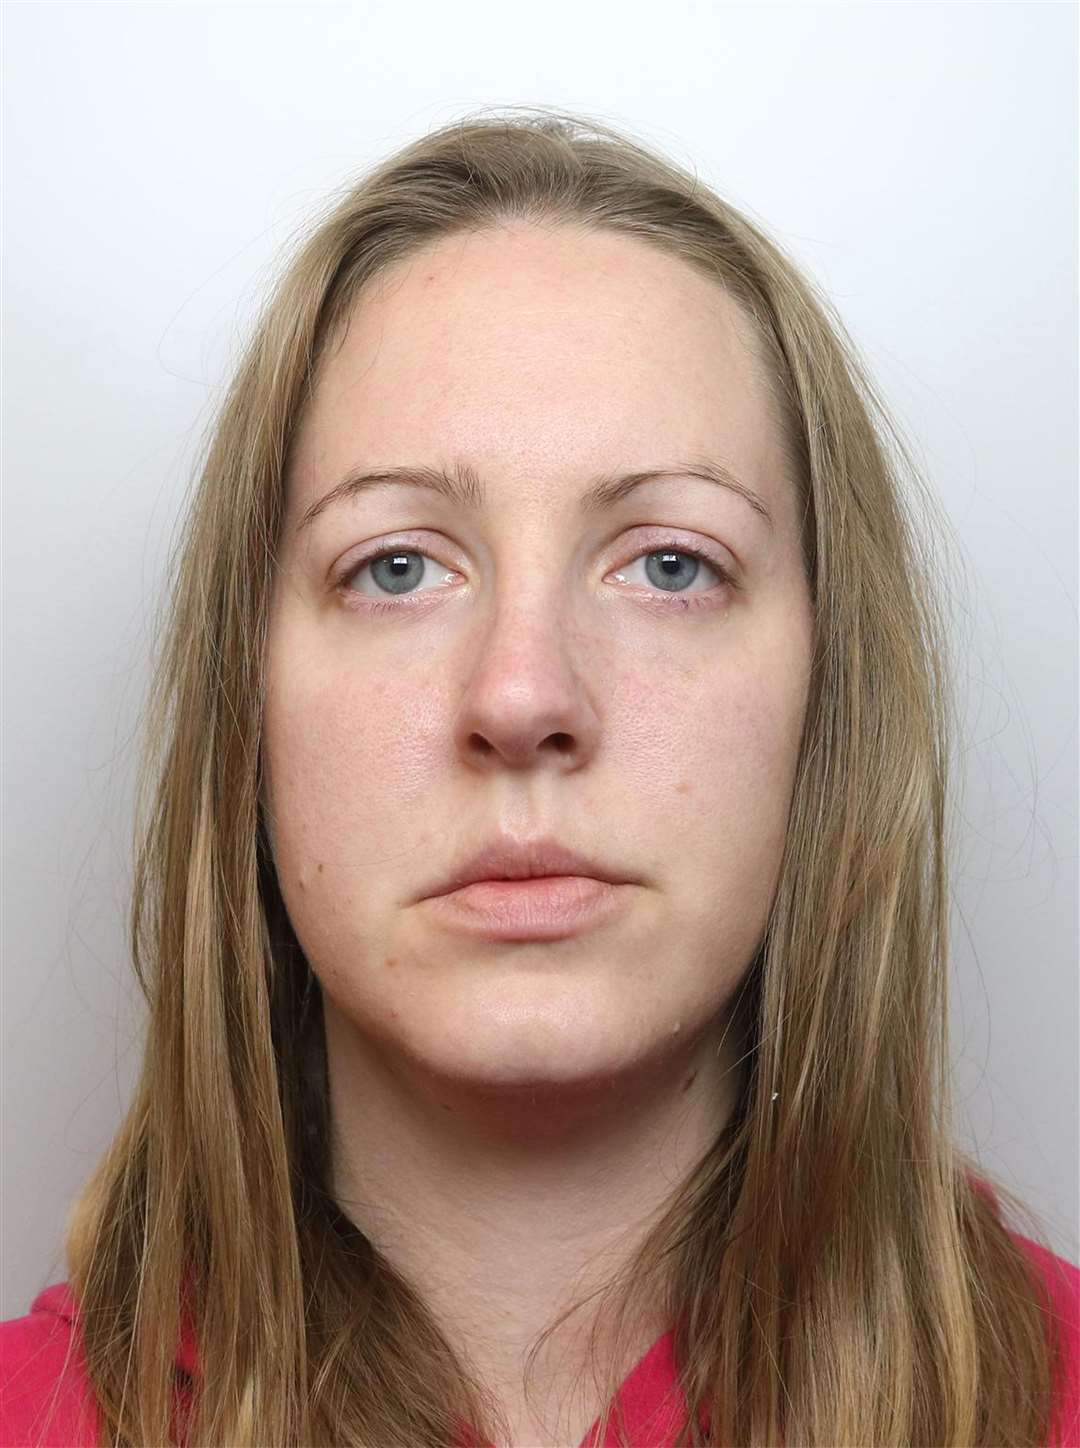 Former nurse Lucy Letby, 34, told a jury she had never intended to or tried to harm any baby in her care (Cheshire Constabulary/PA)